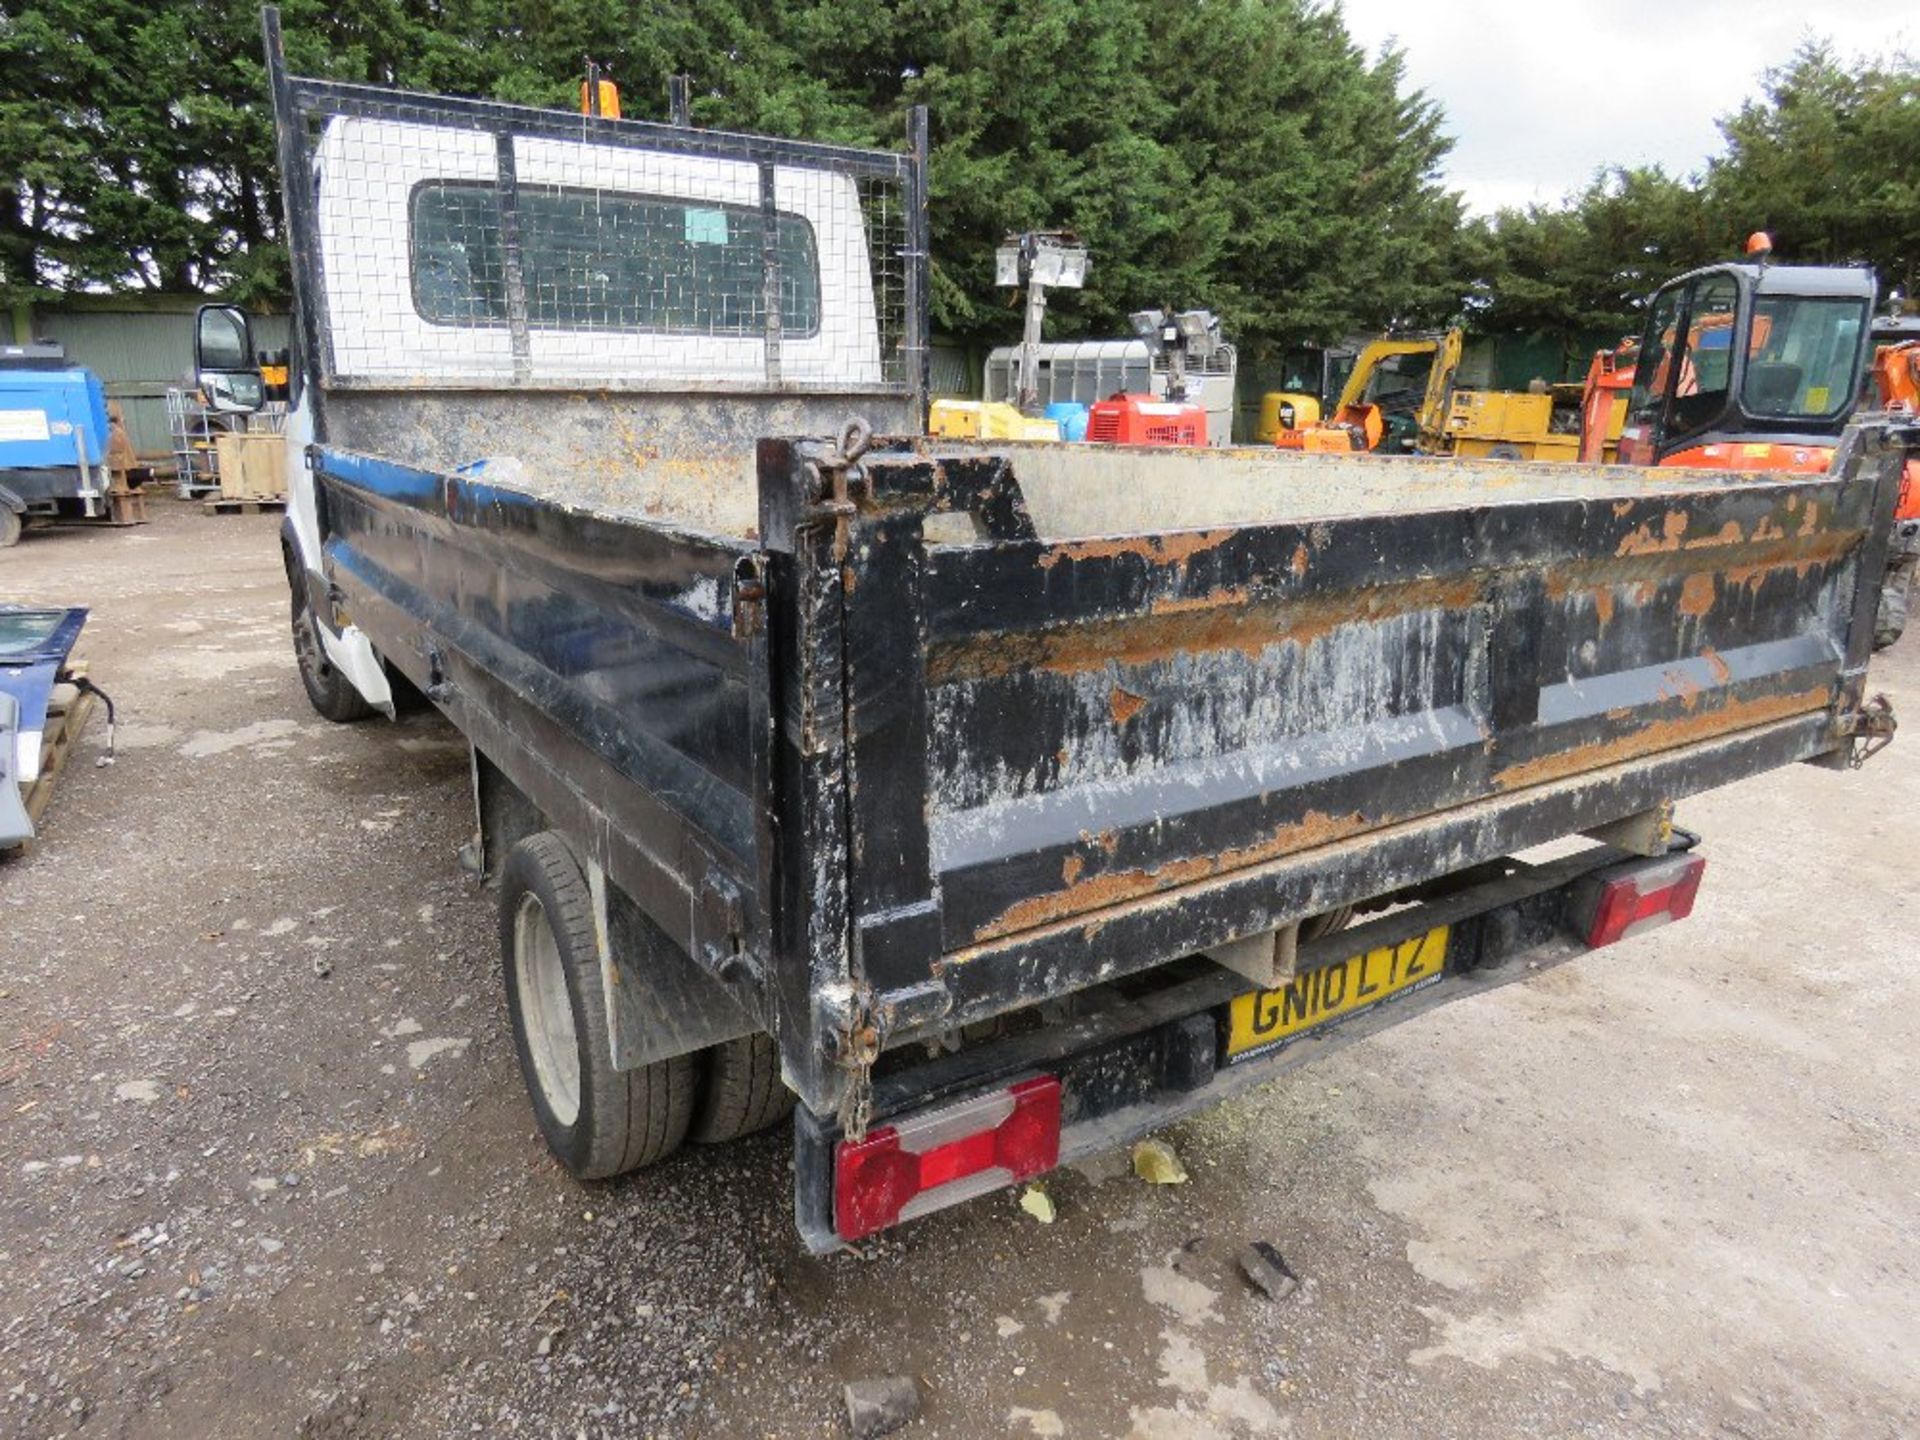 IVECO 35C11 TIPPER TRUCK. REG:GN10 LTZ, LONG TEST, KEY HAS BEEN PREVIOUSLY BROKEN BUT FUNCTIONAL. - Image 8 of 11